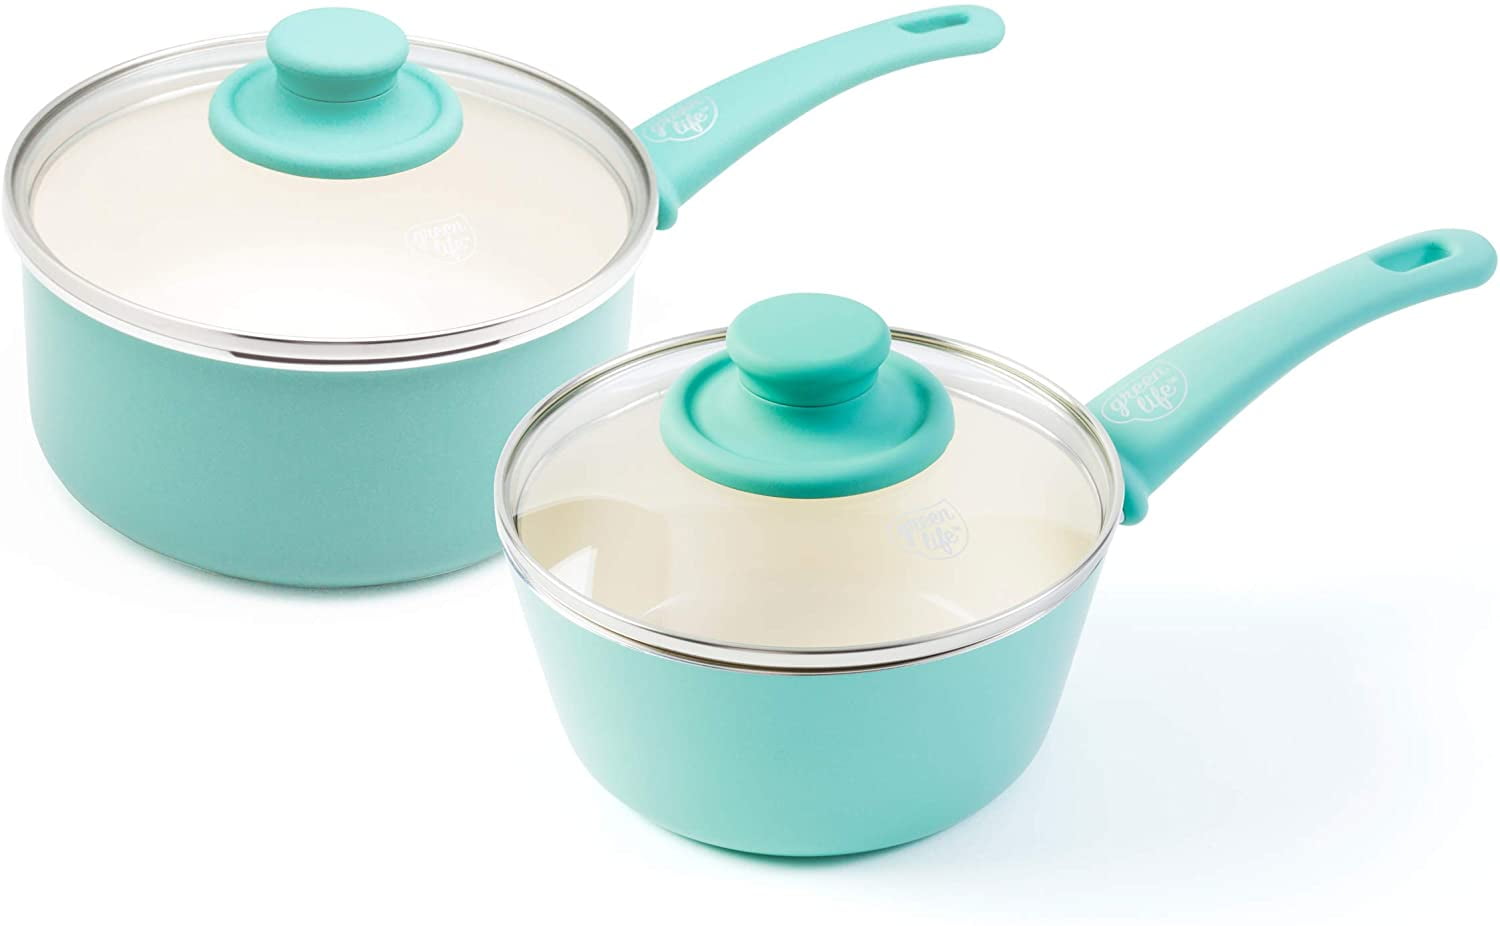 GreenLife Soft Grip 15 Piece Ceramic Non-Stick Induction Cookware Set Turquoise 